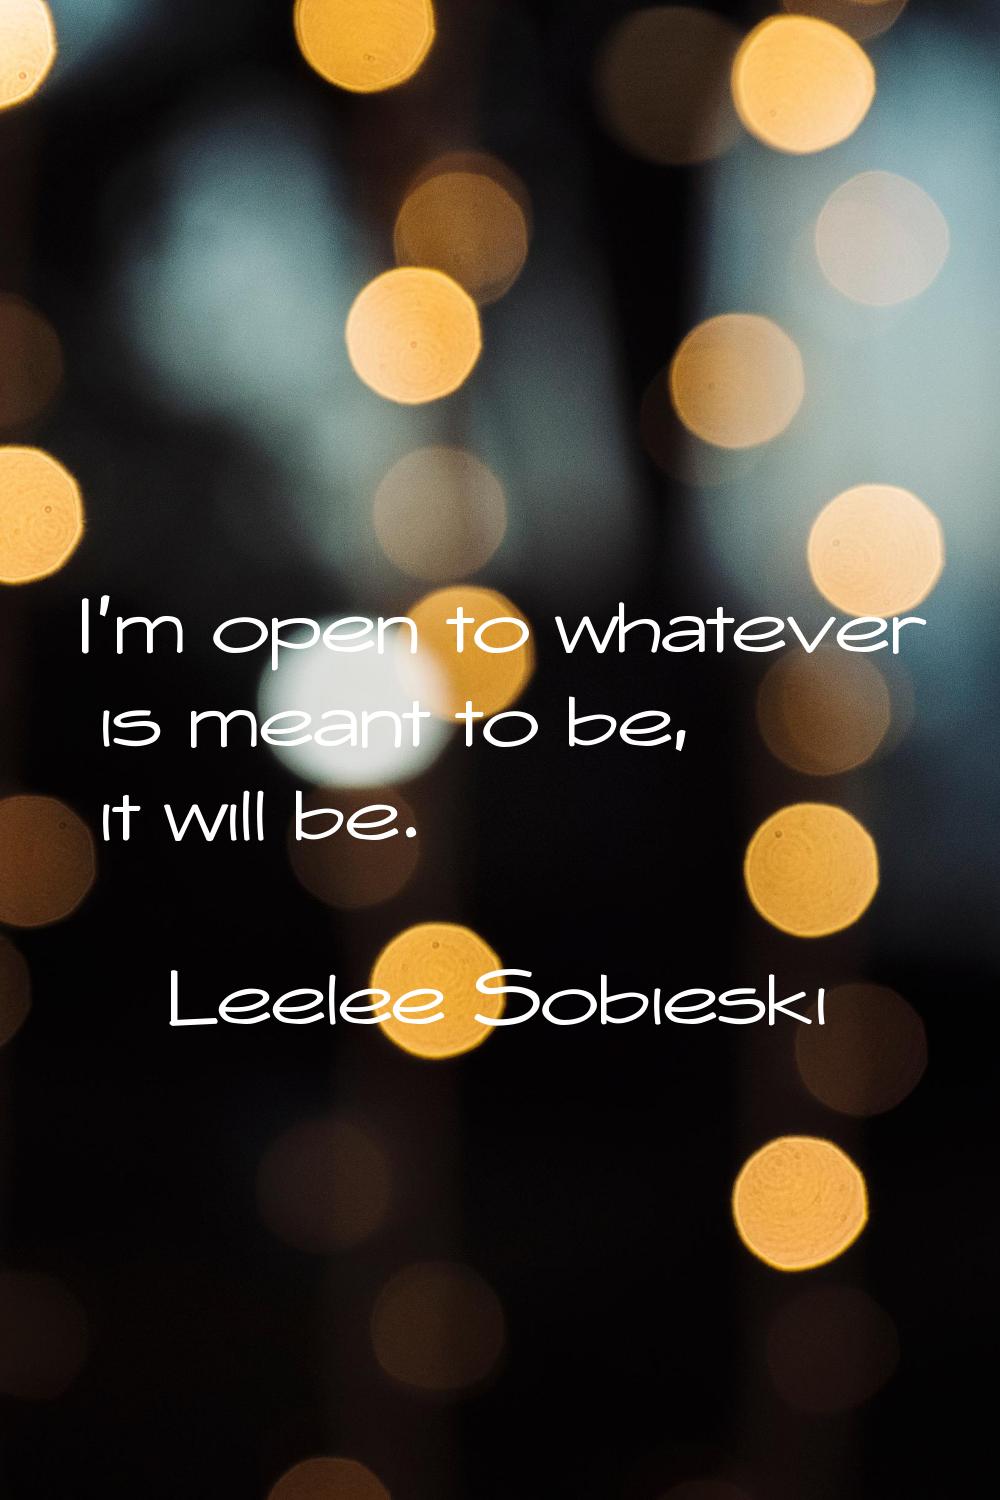 I'm open to whatever is meant to be, it will be.